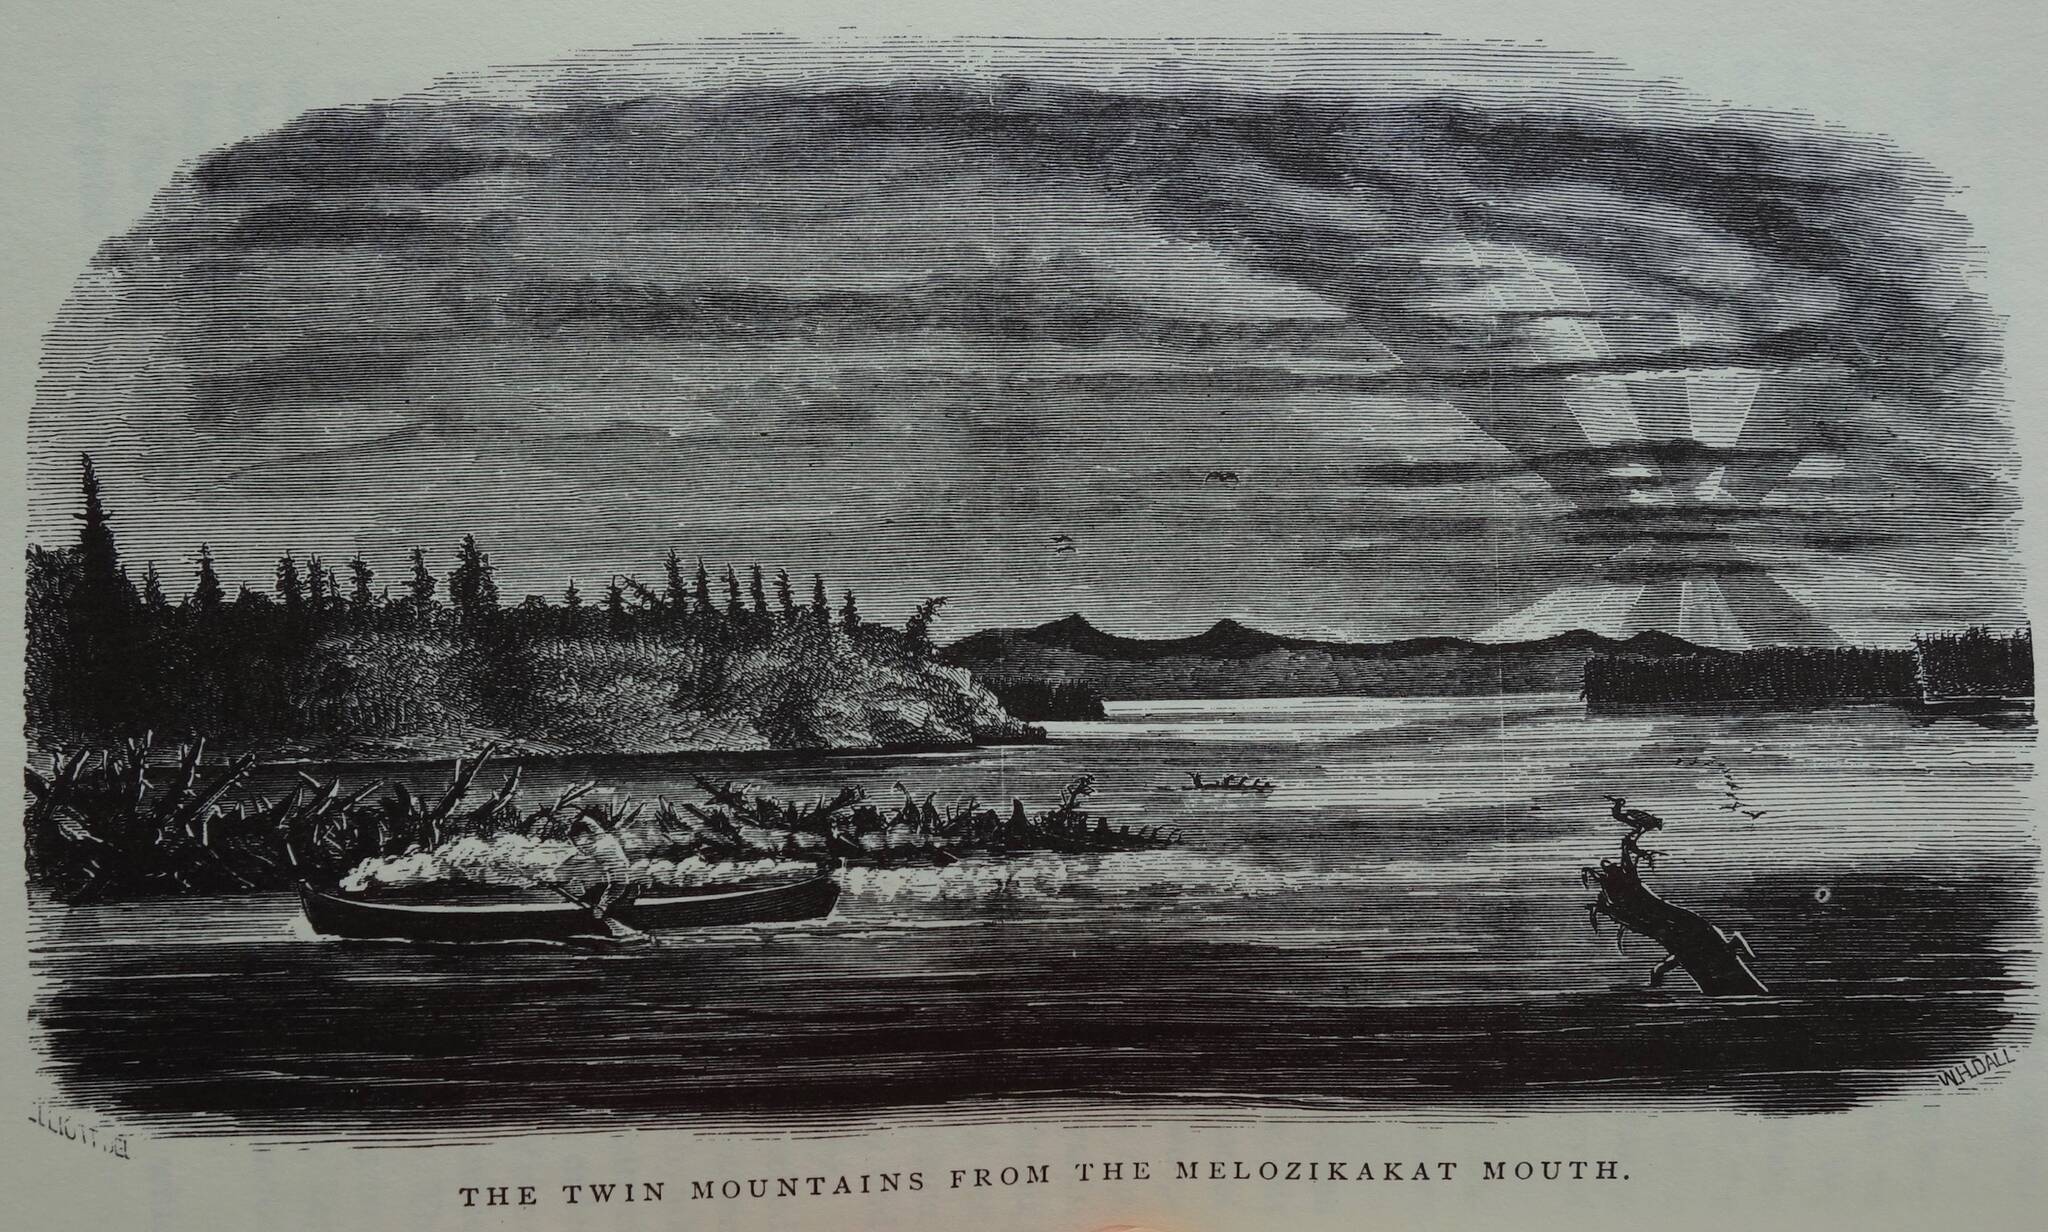 William Dall’s sketch of the mouth of what is now called the Melozitna River, which enters the Yukon River near the village of Ruby, from “Alaska and its Resources.”